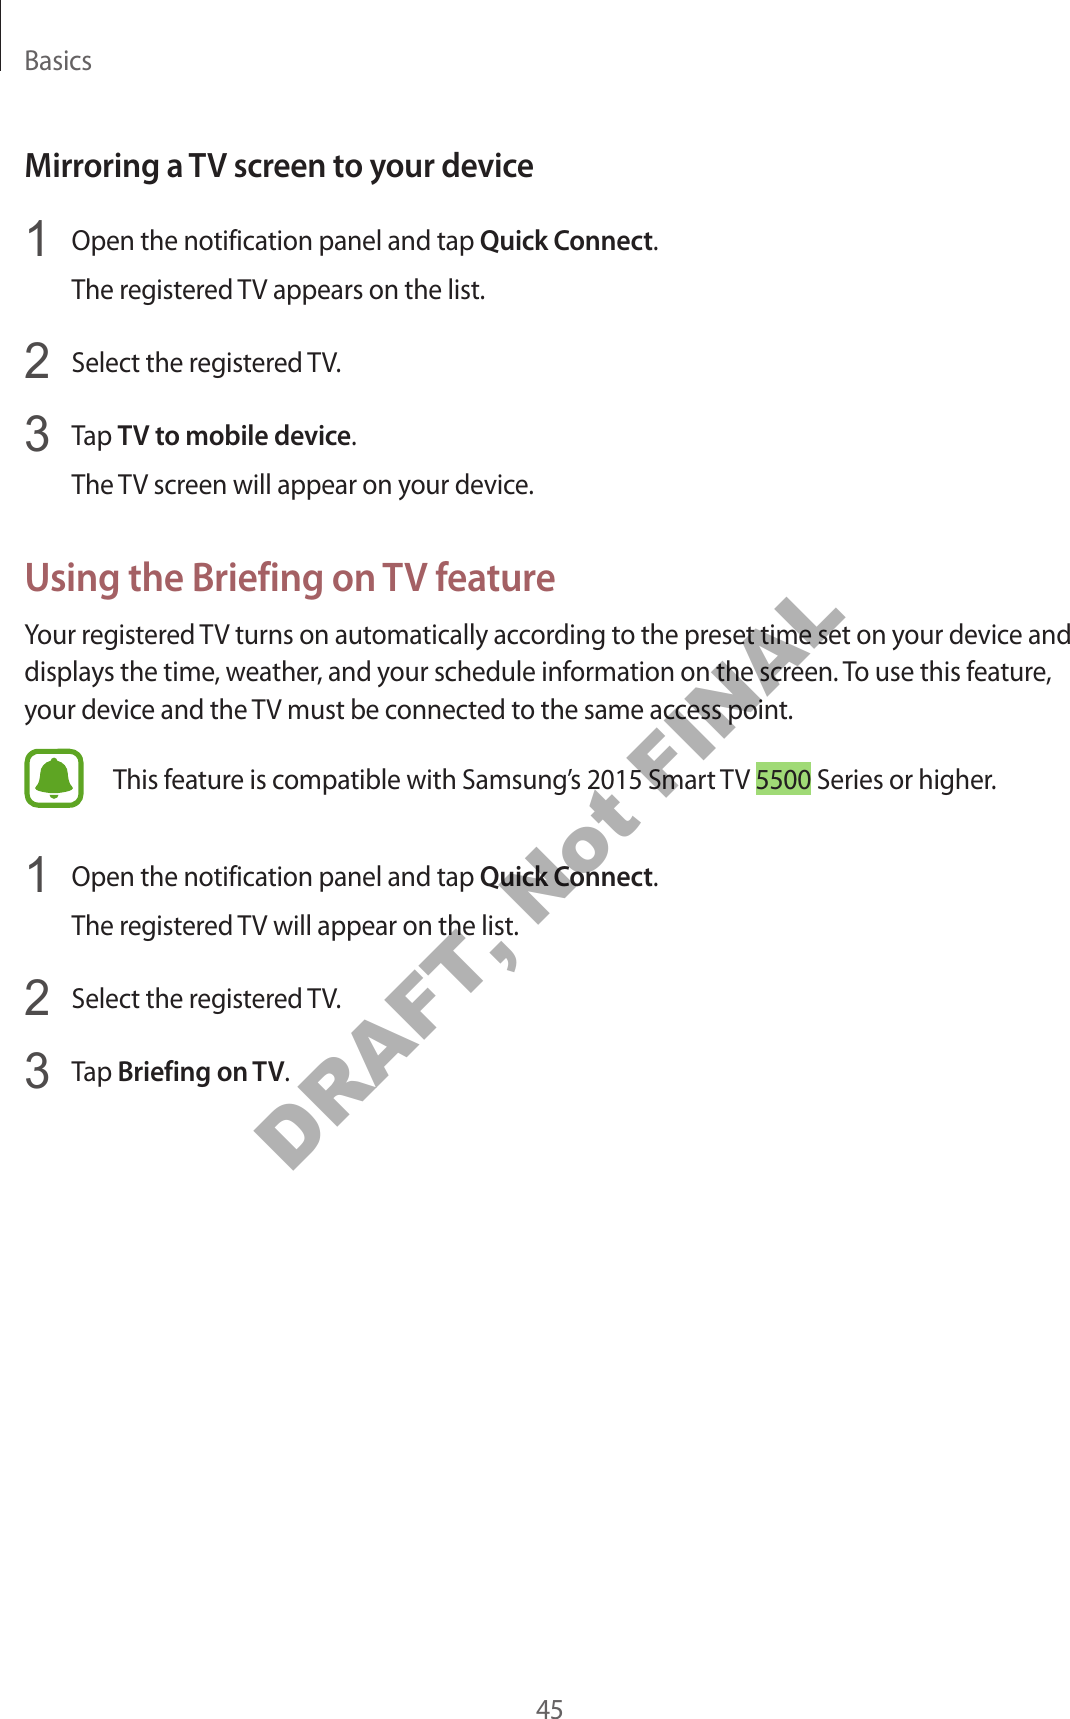 Basics45Mirroring a TV screen to y our devic e1  Open the notification panel and tap Quick Connect.The reg ist er ed TV appears on the list.2  Select the reg ister ed TV.3  Tap TV to mobile device.The TV screen will appear on your devic e .Using the Briefing on TV fea tur eYour register ed TV turns on automatically accor ding t o the pr eset time set on y our device and displays the time , w ea ther, and your schedule information on the scr een. To use this feature , your device and the TV must be connected to the same access point.This f eatur e is c ompatible with Samsung’s 2015 Smart TV 5500 Series or higher.1  Open the notification panel and tap Quick Connect.The reg ist er ed TV will appear on the list.2  Select the reg ister ed TV.3  Tap Briefing on TV.DRAFT, Not FINAL